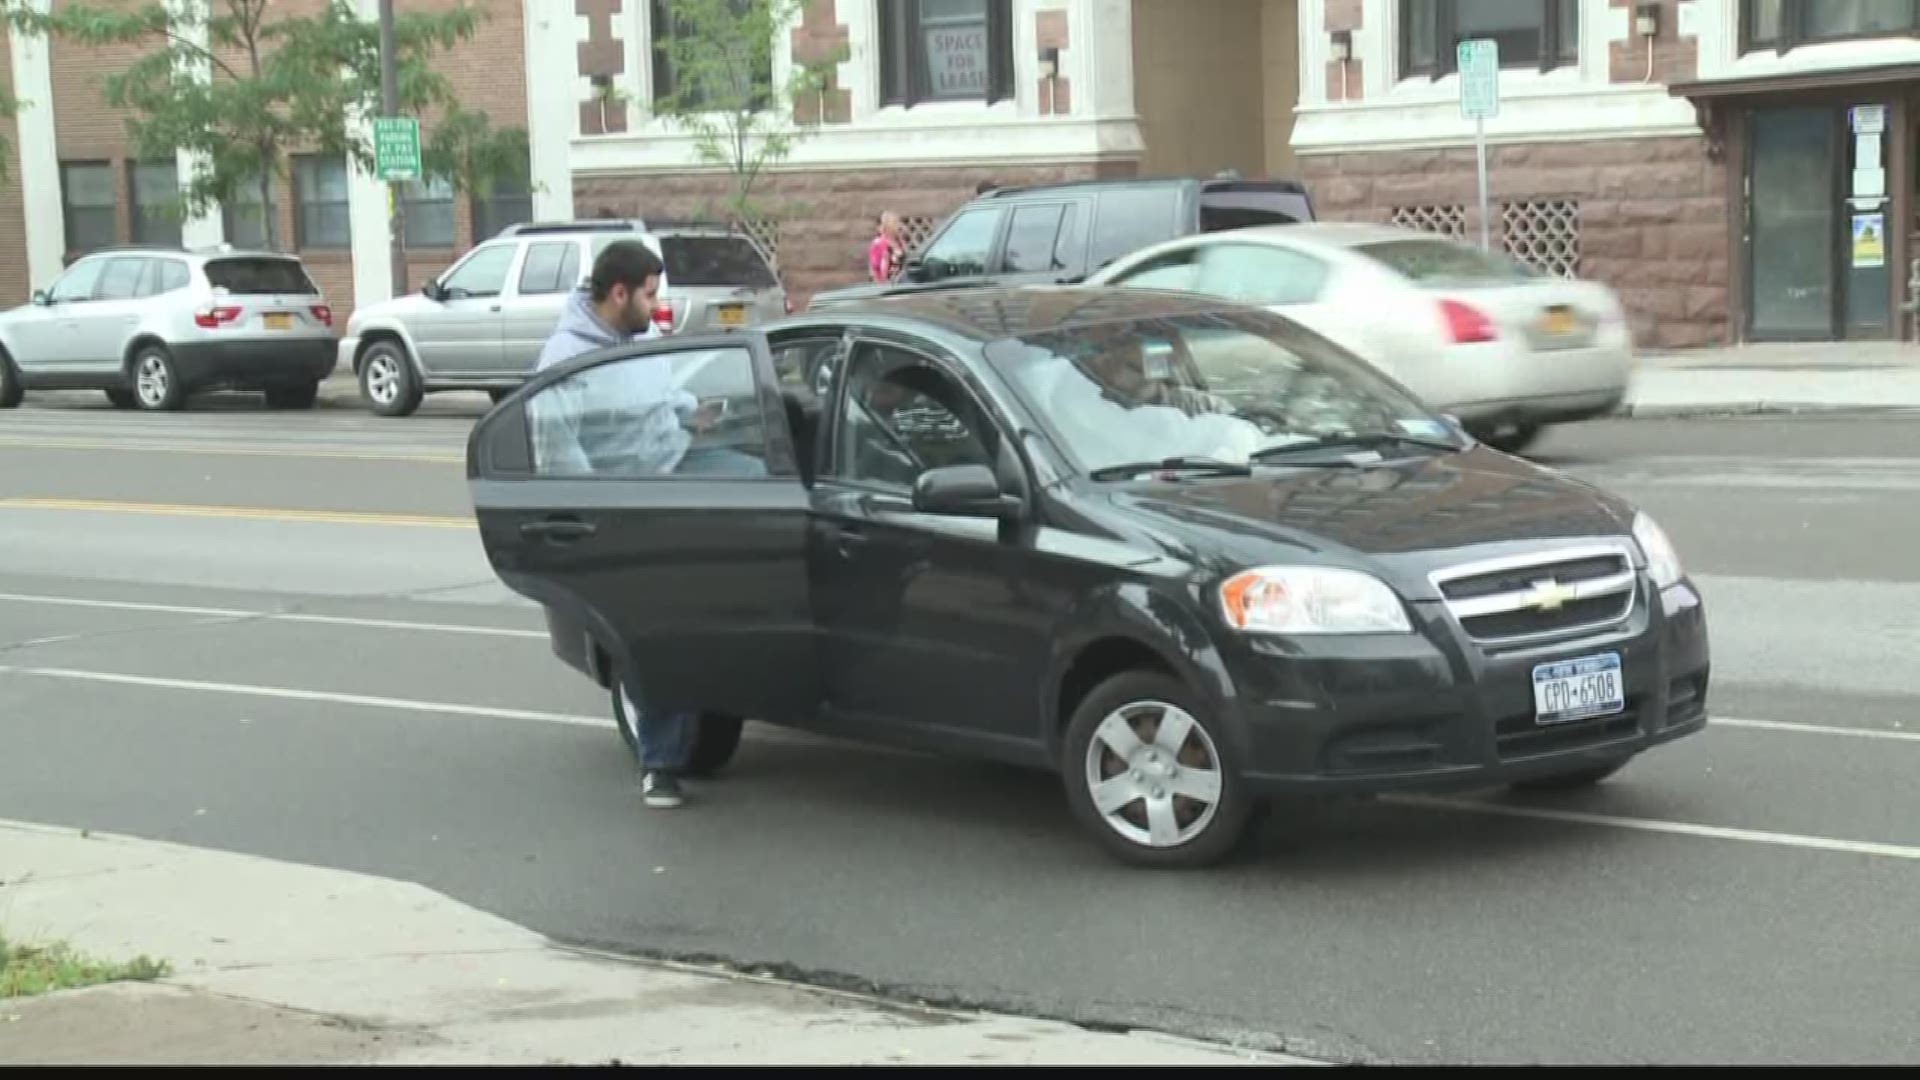 Channel 2's Heather Ly talked with concertgoers who took Uber and Lyft to Rockin' at the Knox.